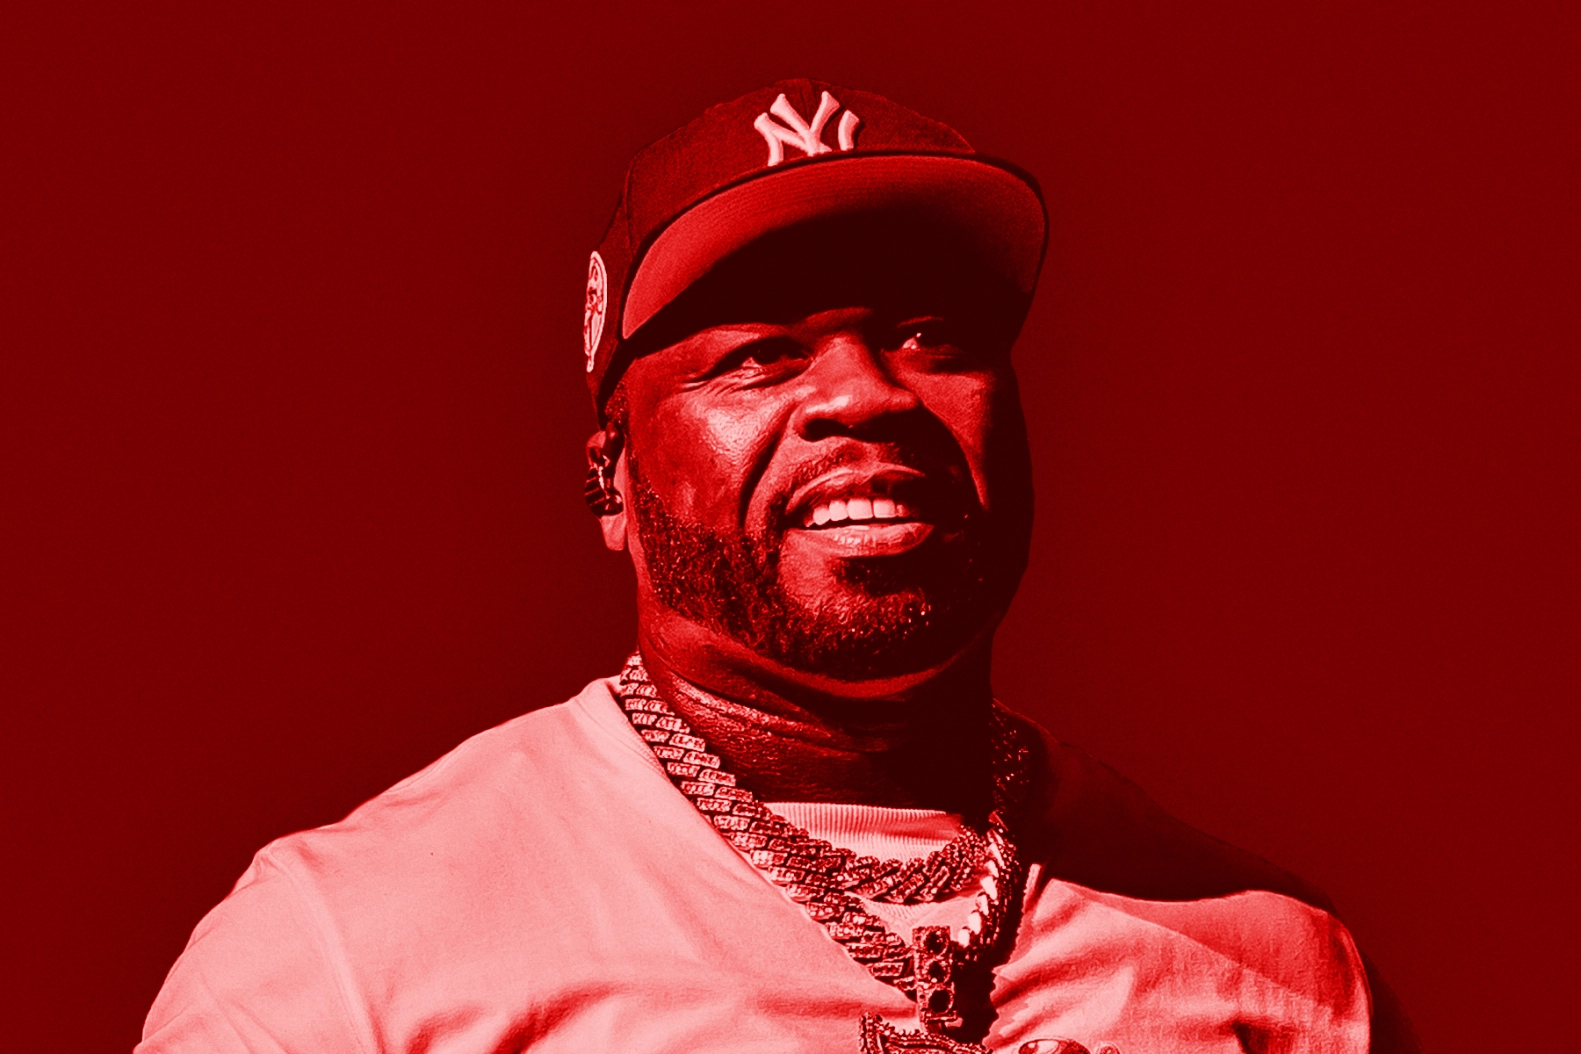 OVER A $1 BILLION “POWER” LAWSUIT, 50 CENT IS ACCUSED OF CONFRONTING AN EX-DRUG LORD AT HIS HOME